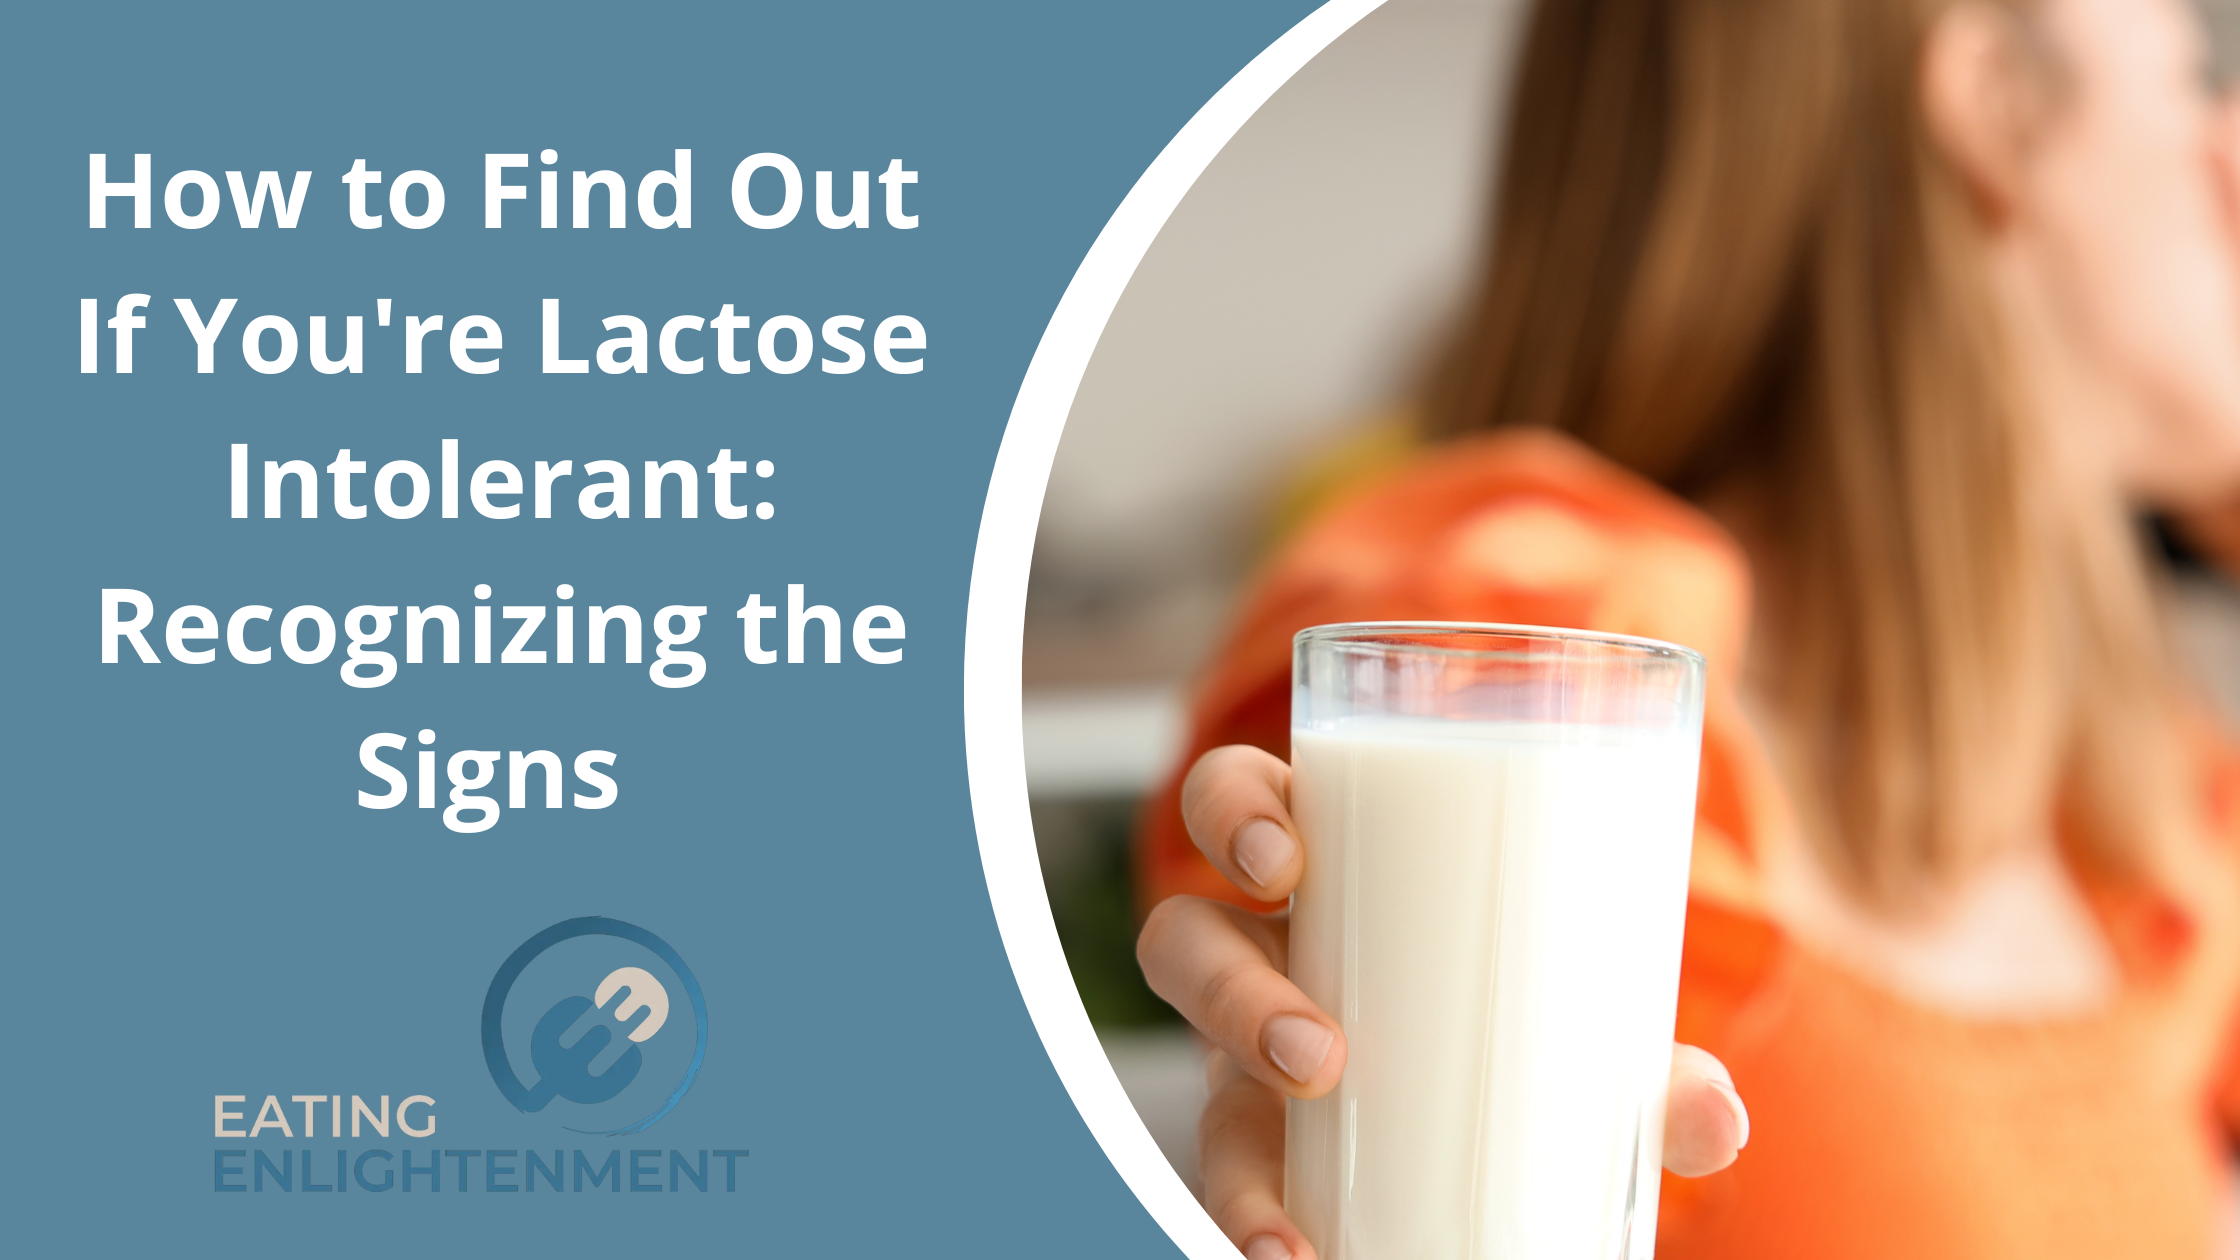 How to Find Out If You're Lactose Intolerant: Recognizing the Signs